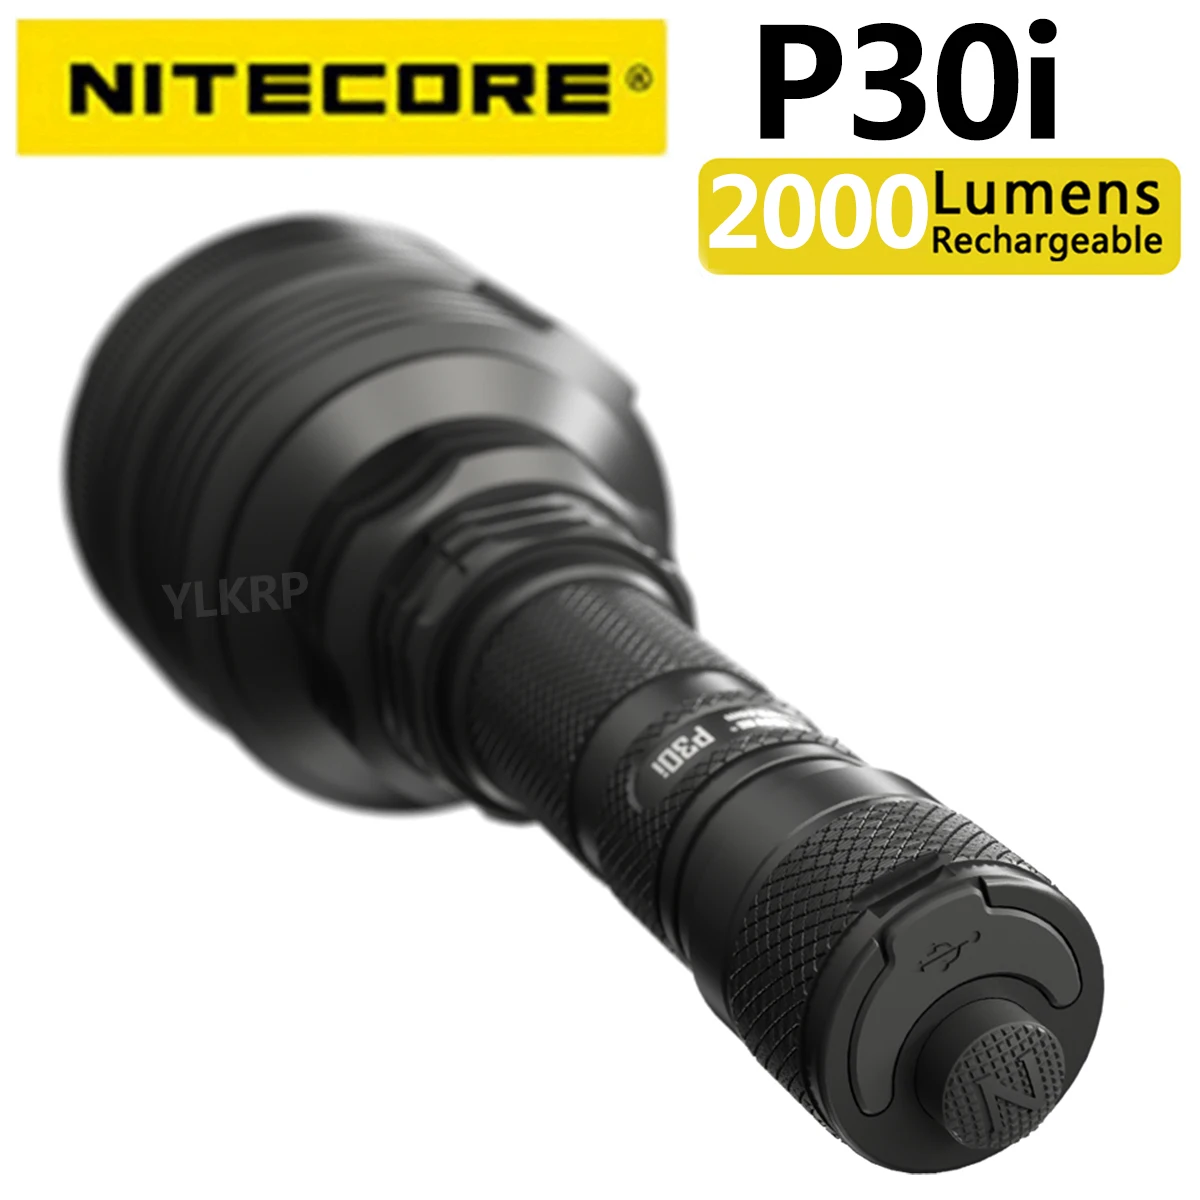 NITECORE P30I 2000 lumens search flashlight USB rechargeable package includes a NL2150HPI lithium battery